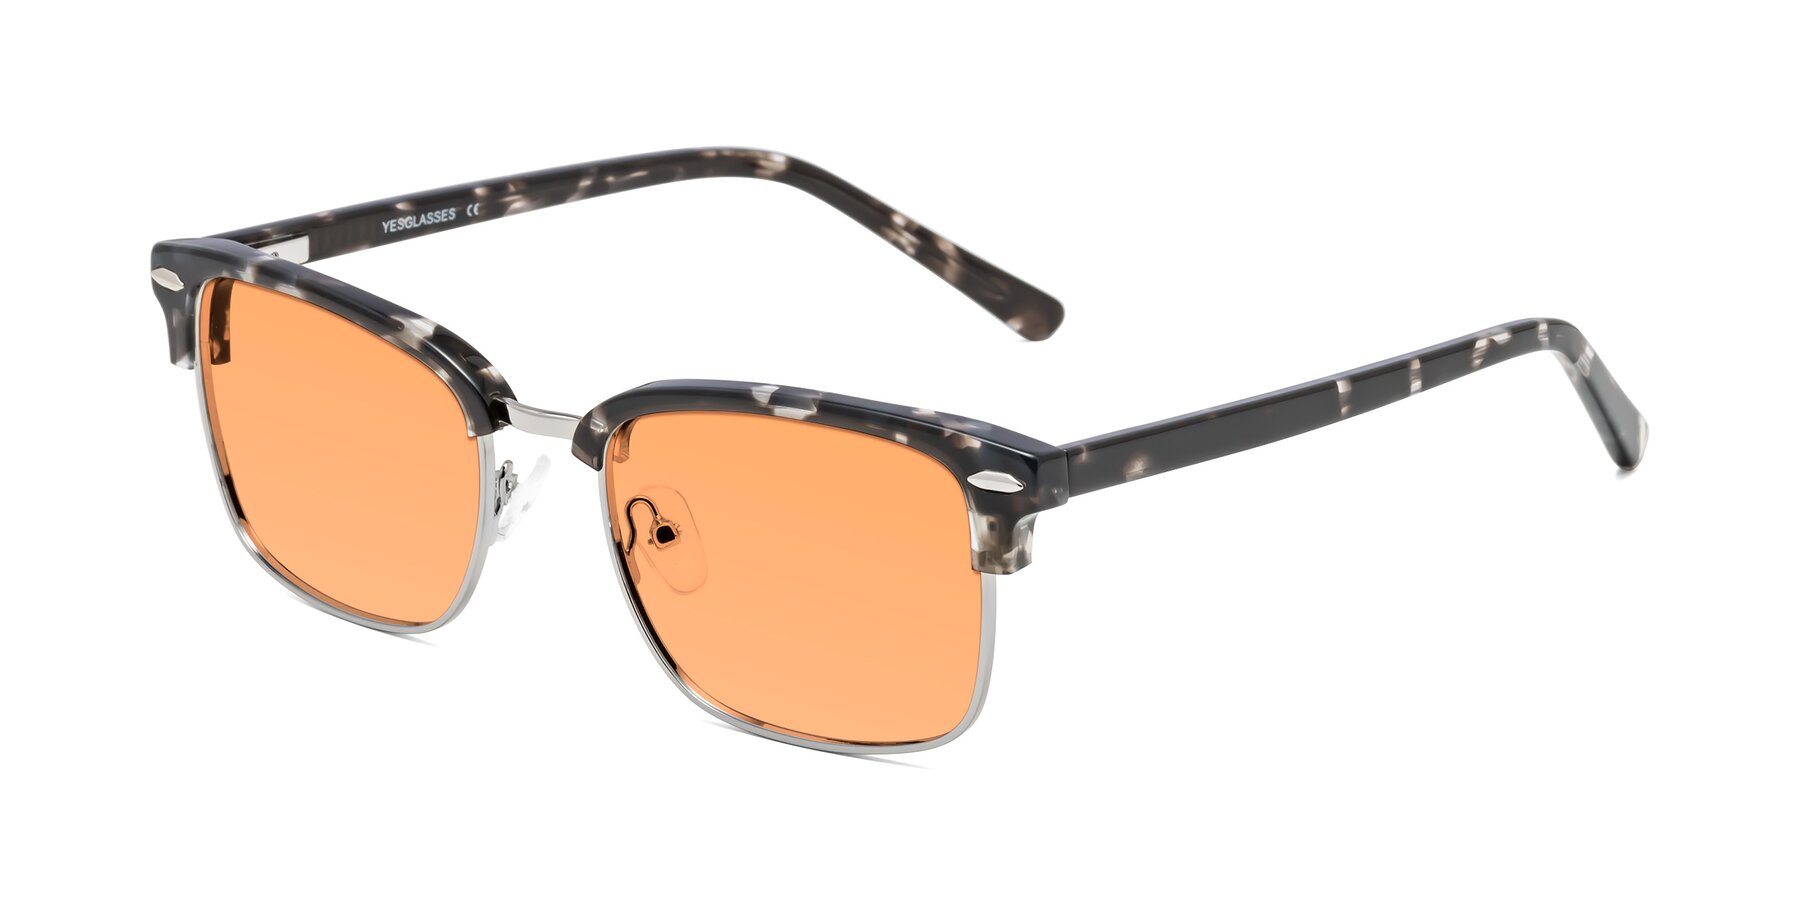 Angle of 17464 in Tortoise-Silver with Medium Orange Tinted Lenses